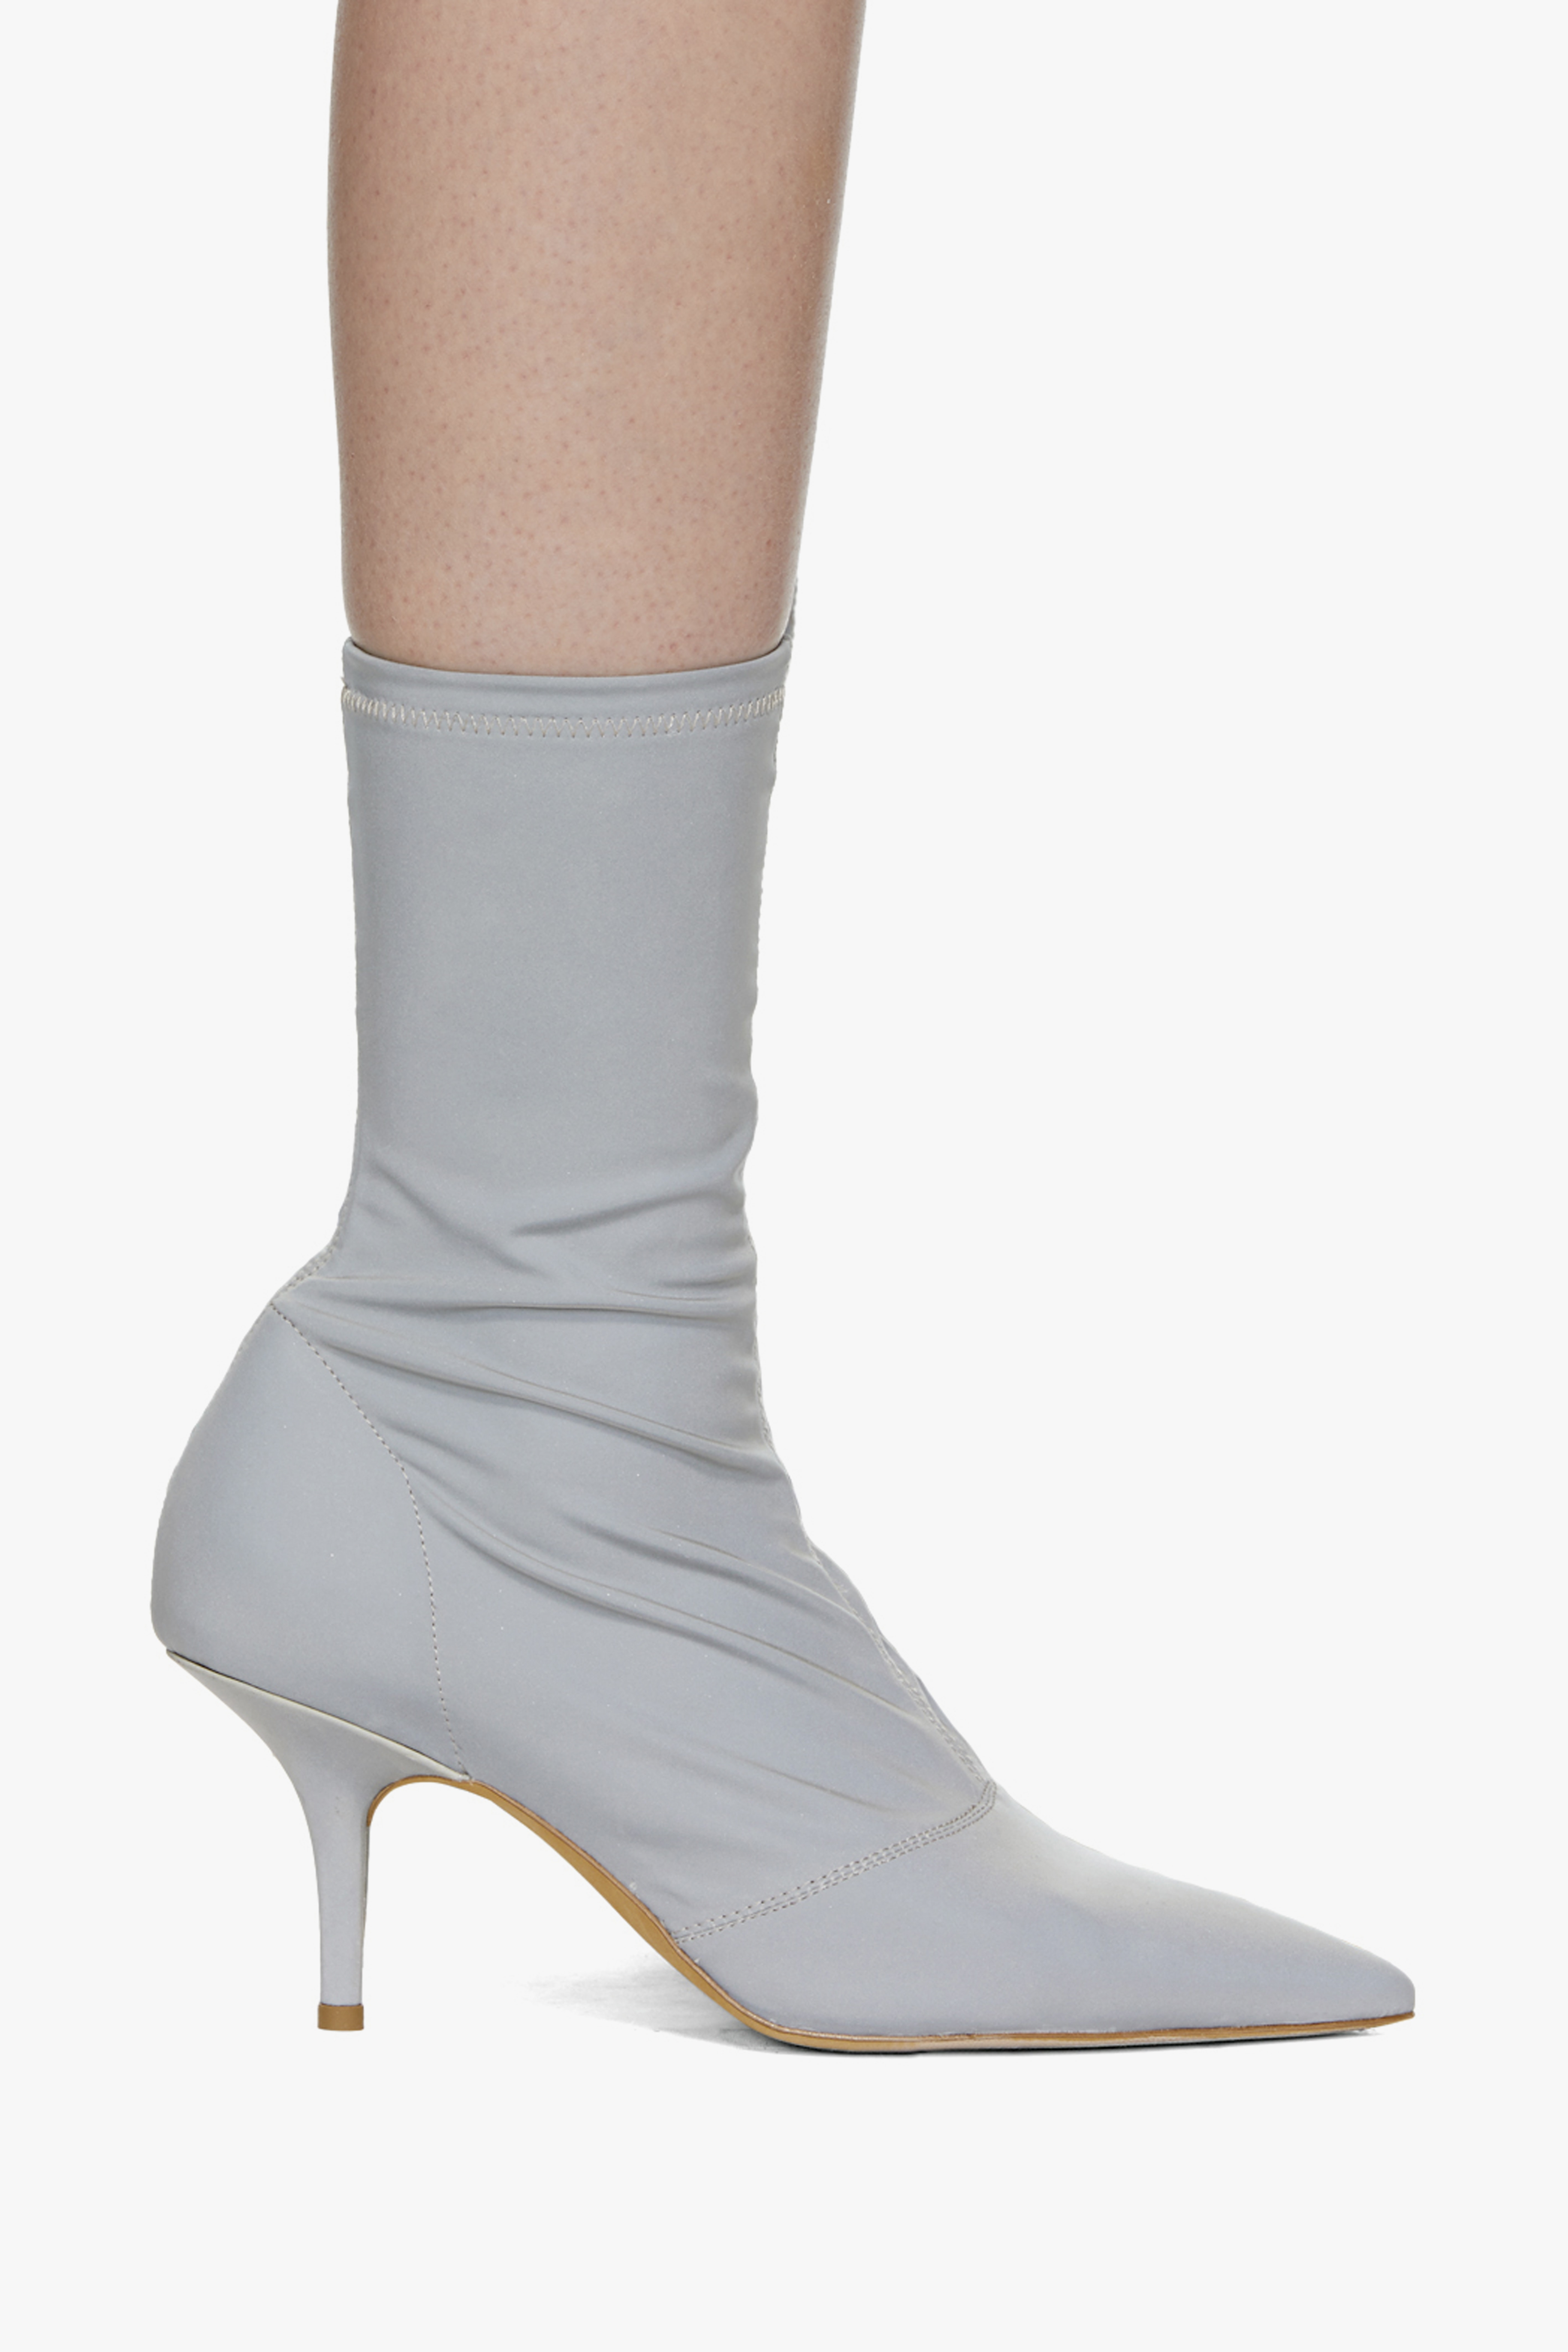 YEEZY Silver Reflective Ankle Boots Kim Kardashian Outfit Sock Heels